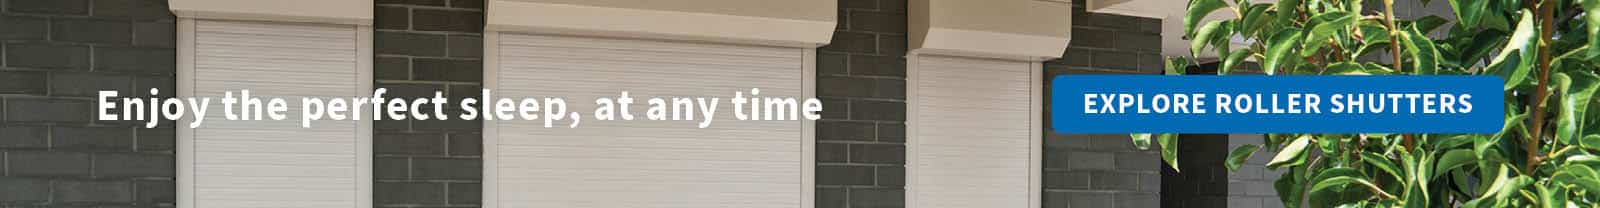 Enjoy peace of mind with Roller Shutters